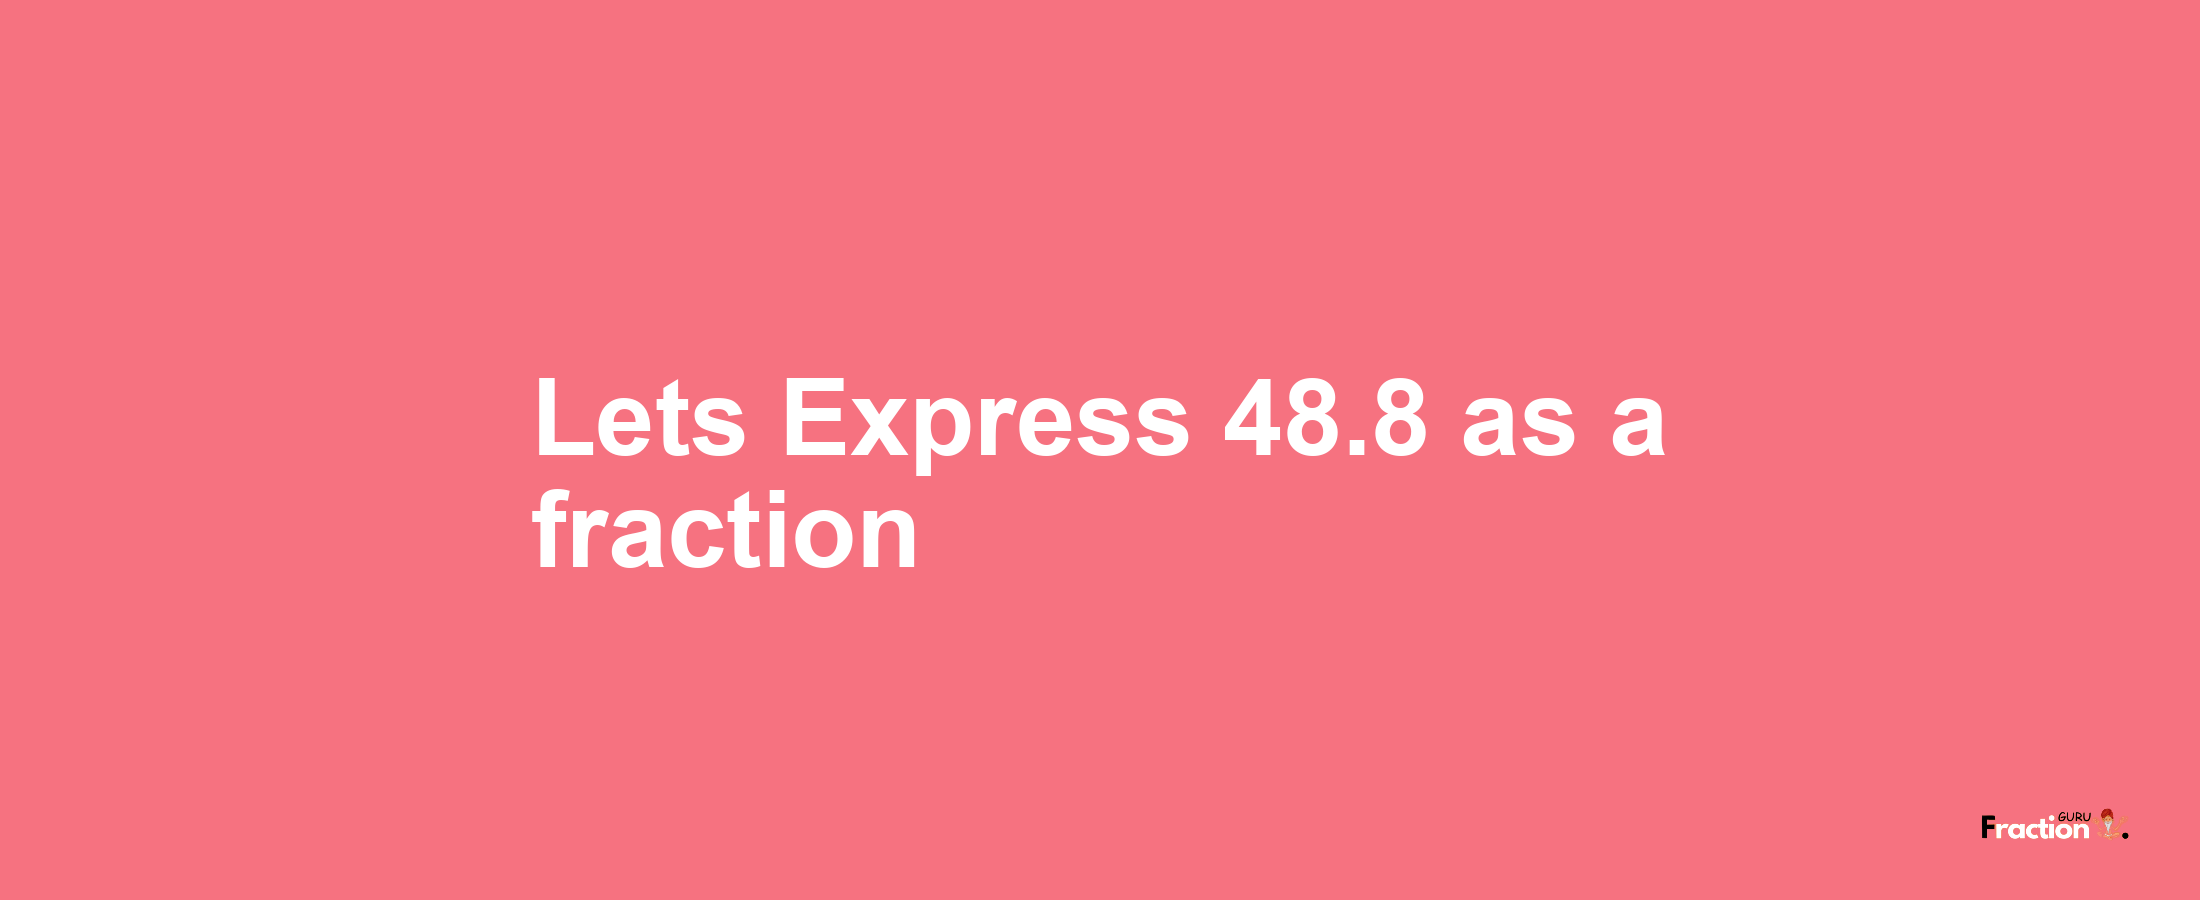 Lets Express 48.8 as afraction